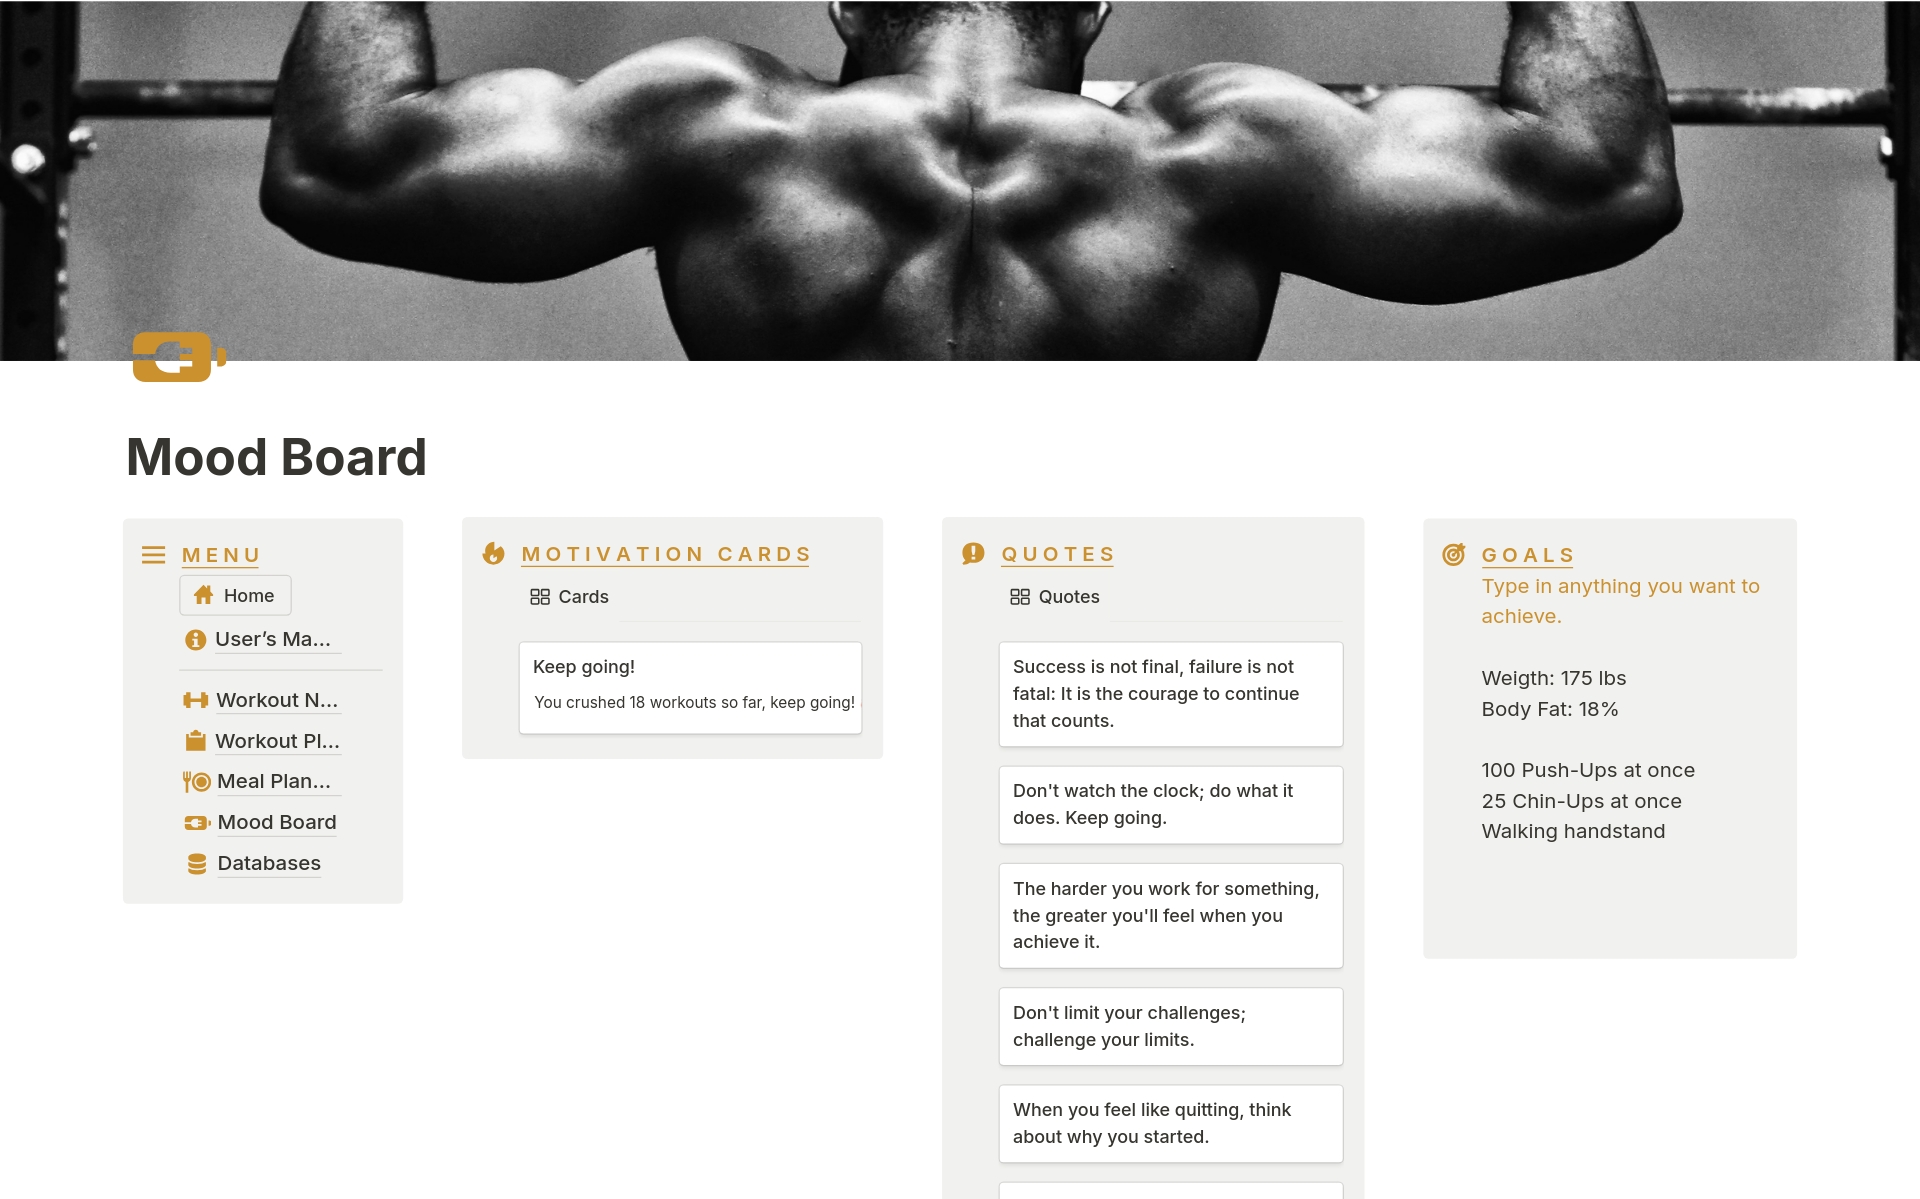 Ultimate Gymbuddy is a comprehensive fitness template designed to track workouts, set goals, measure progress, and plan meals, helping users achieve their fitness goals and maintain a healthy lifestyle.